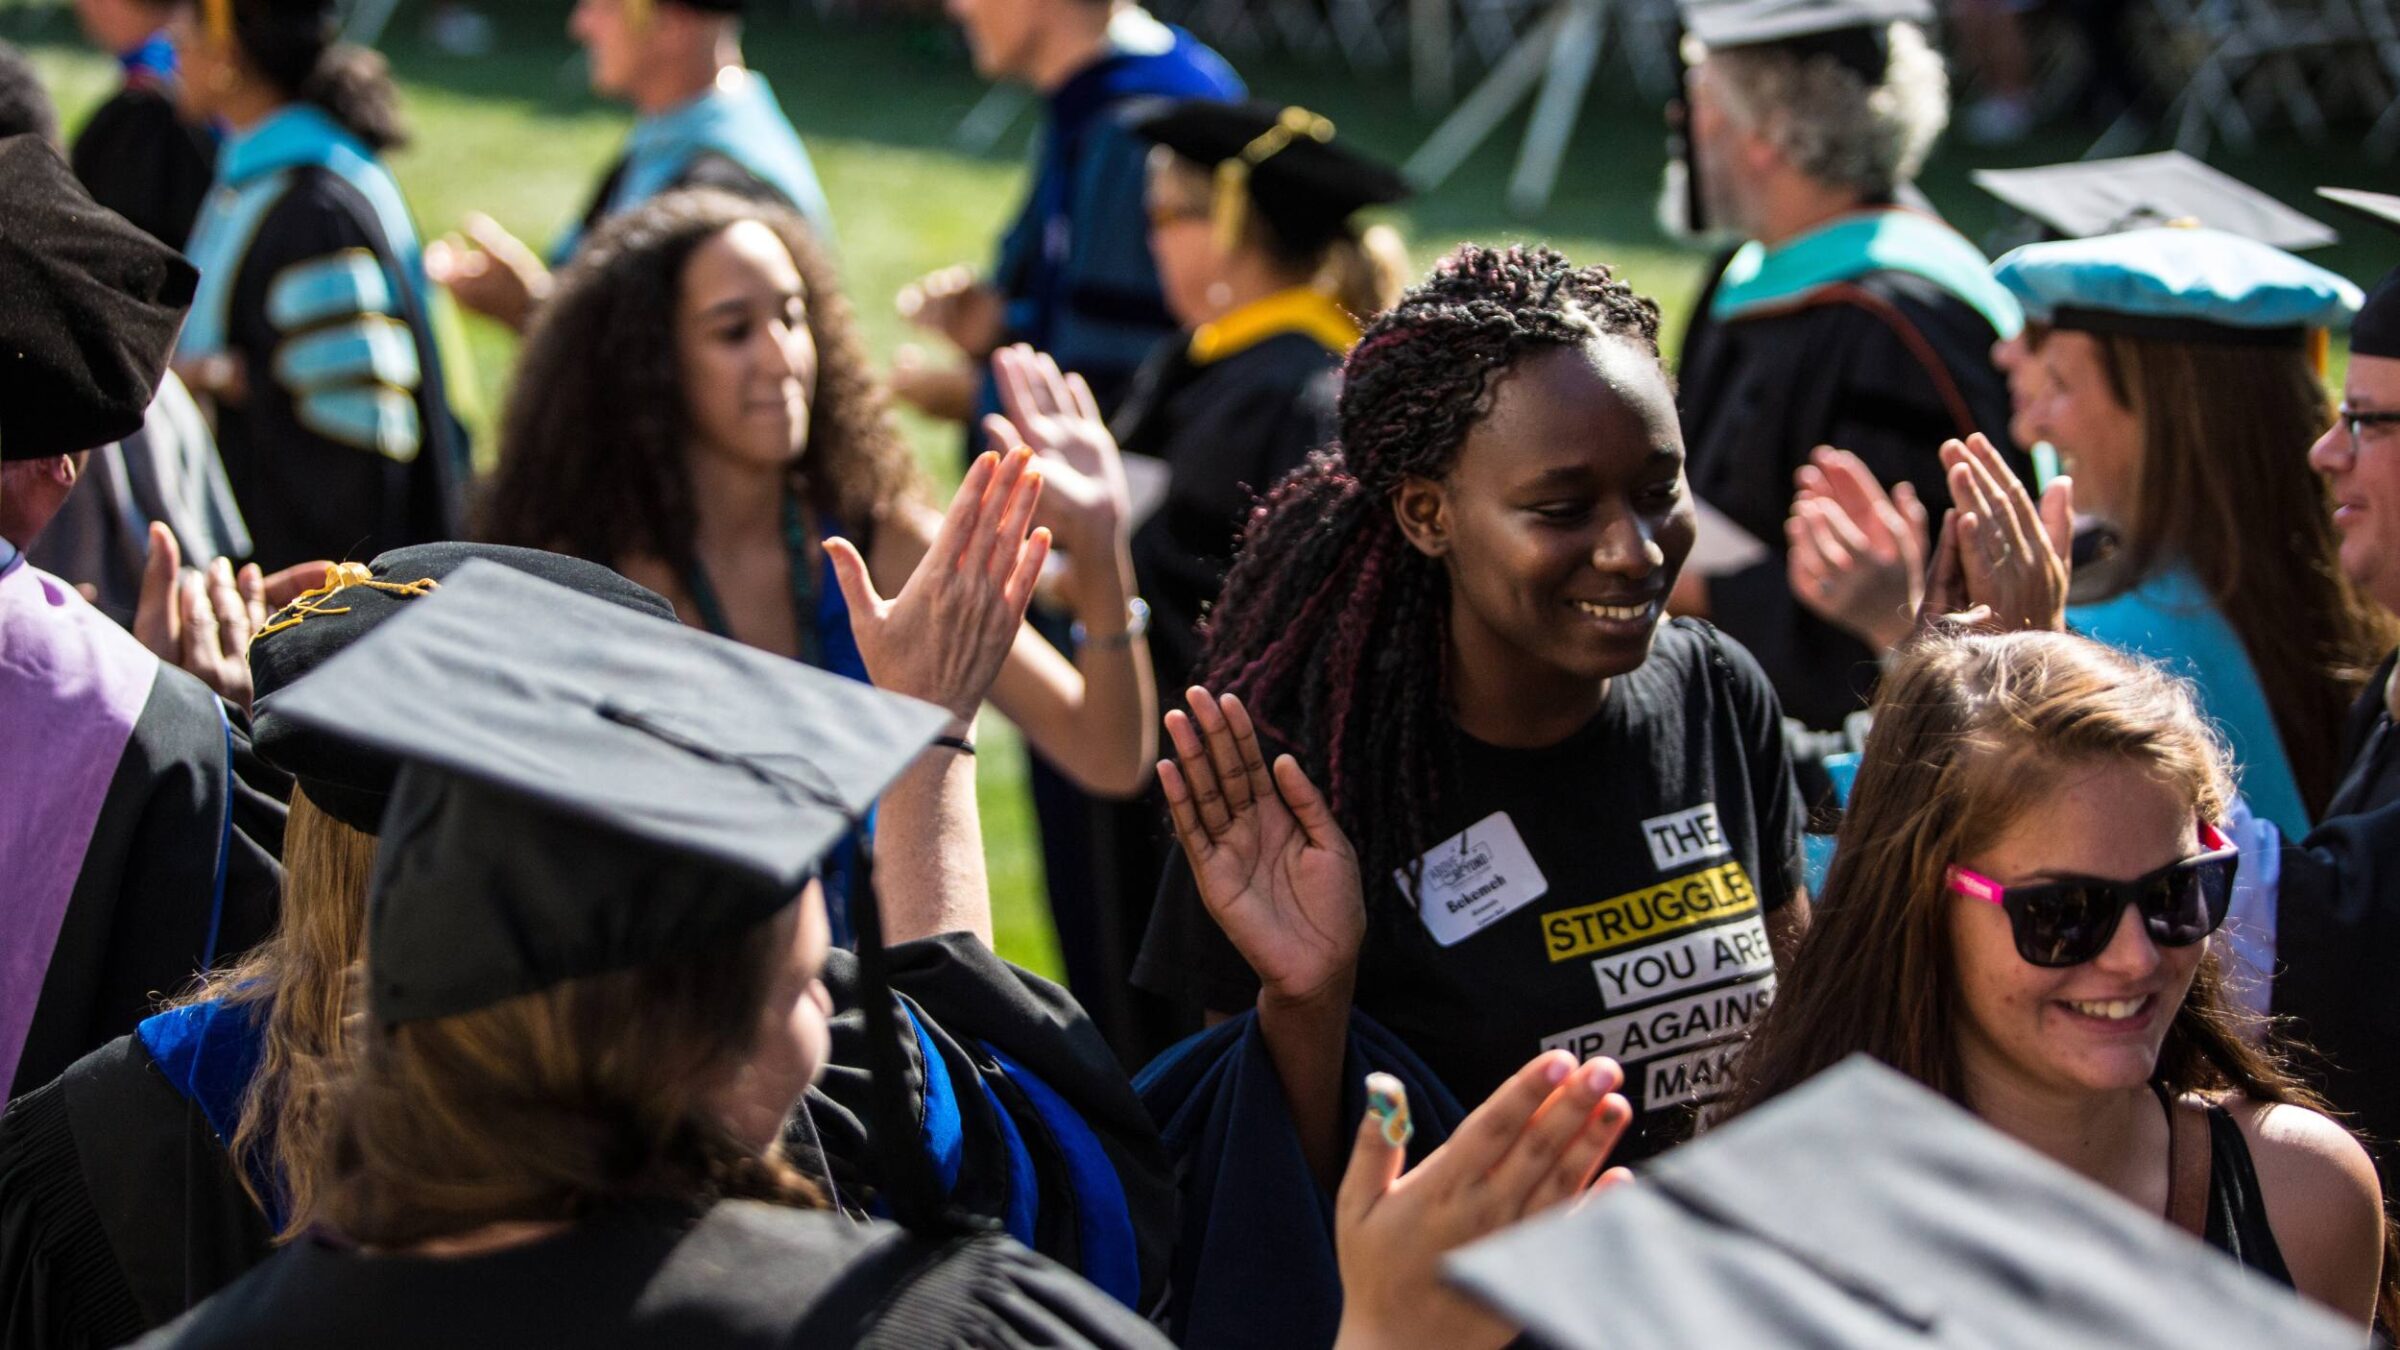 Students smiling as they walk through members of faculty wearing graduation caps high fiving each other